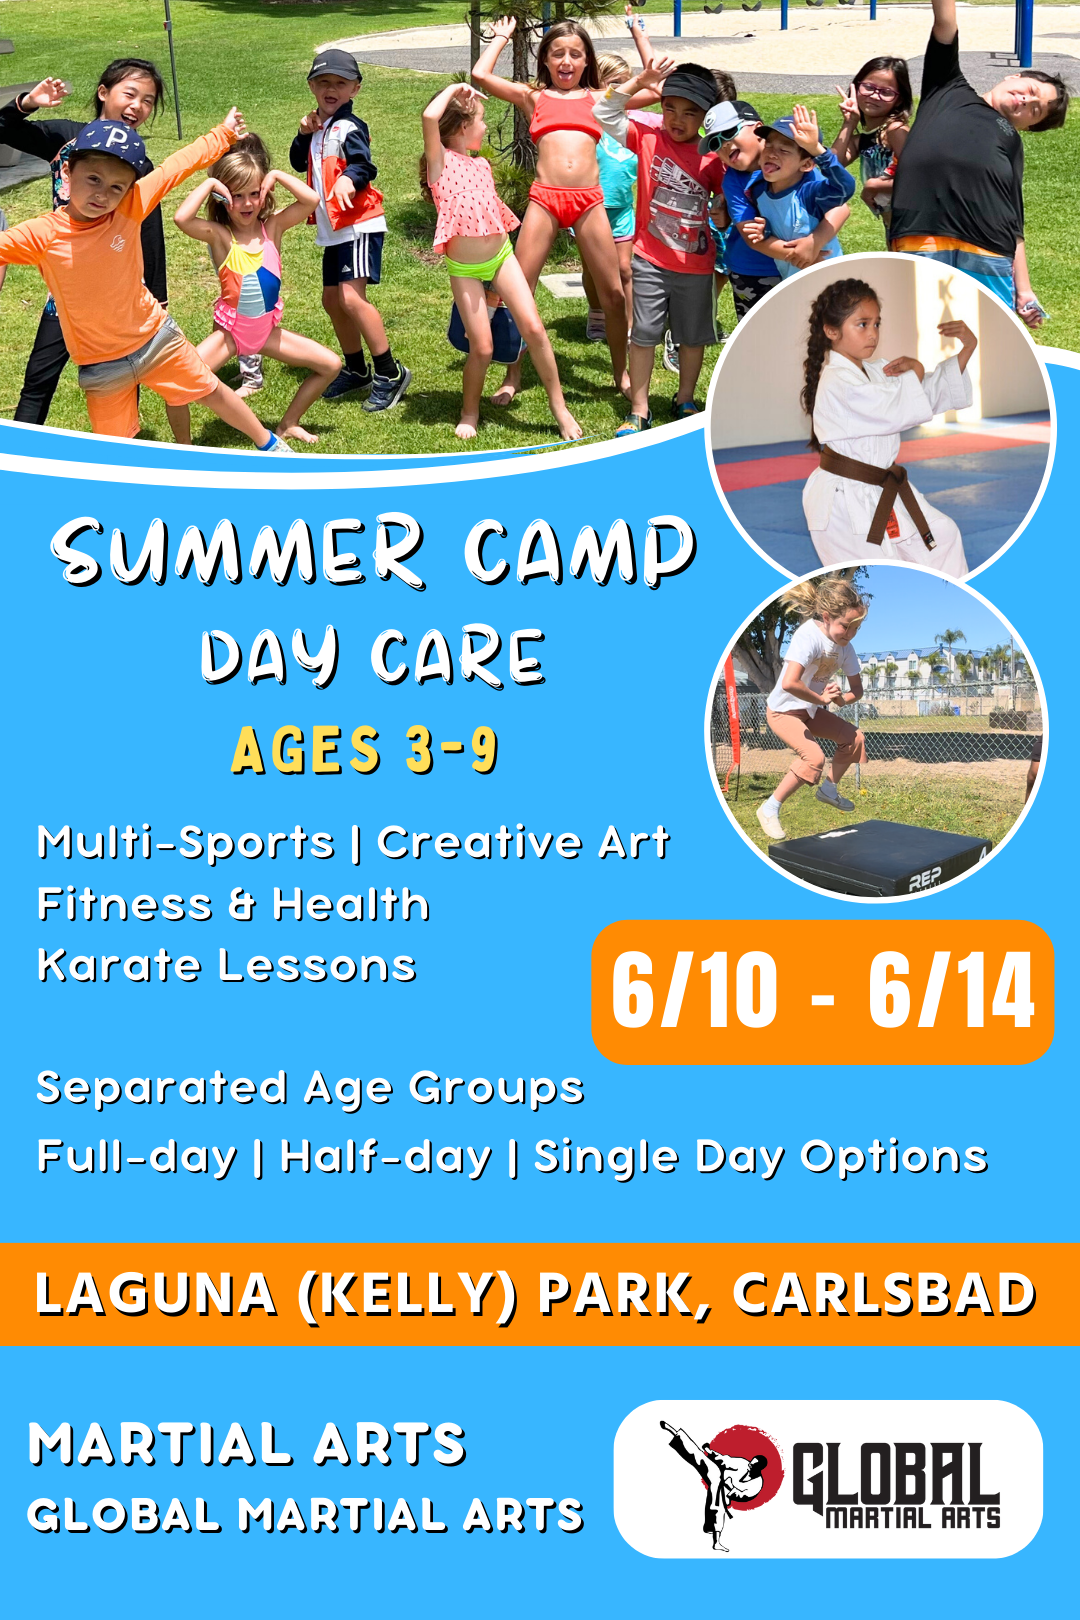 6/10 - 6/14 | Mon - Fri | 8:30 - 4:00<br>Multi-Sports, Art, and Martial Arts<br>Laguna (Kelly) Park, Carlsbad<br>Ages 3-9 | Separated Age Groups